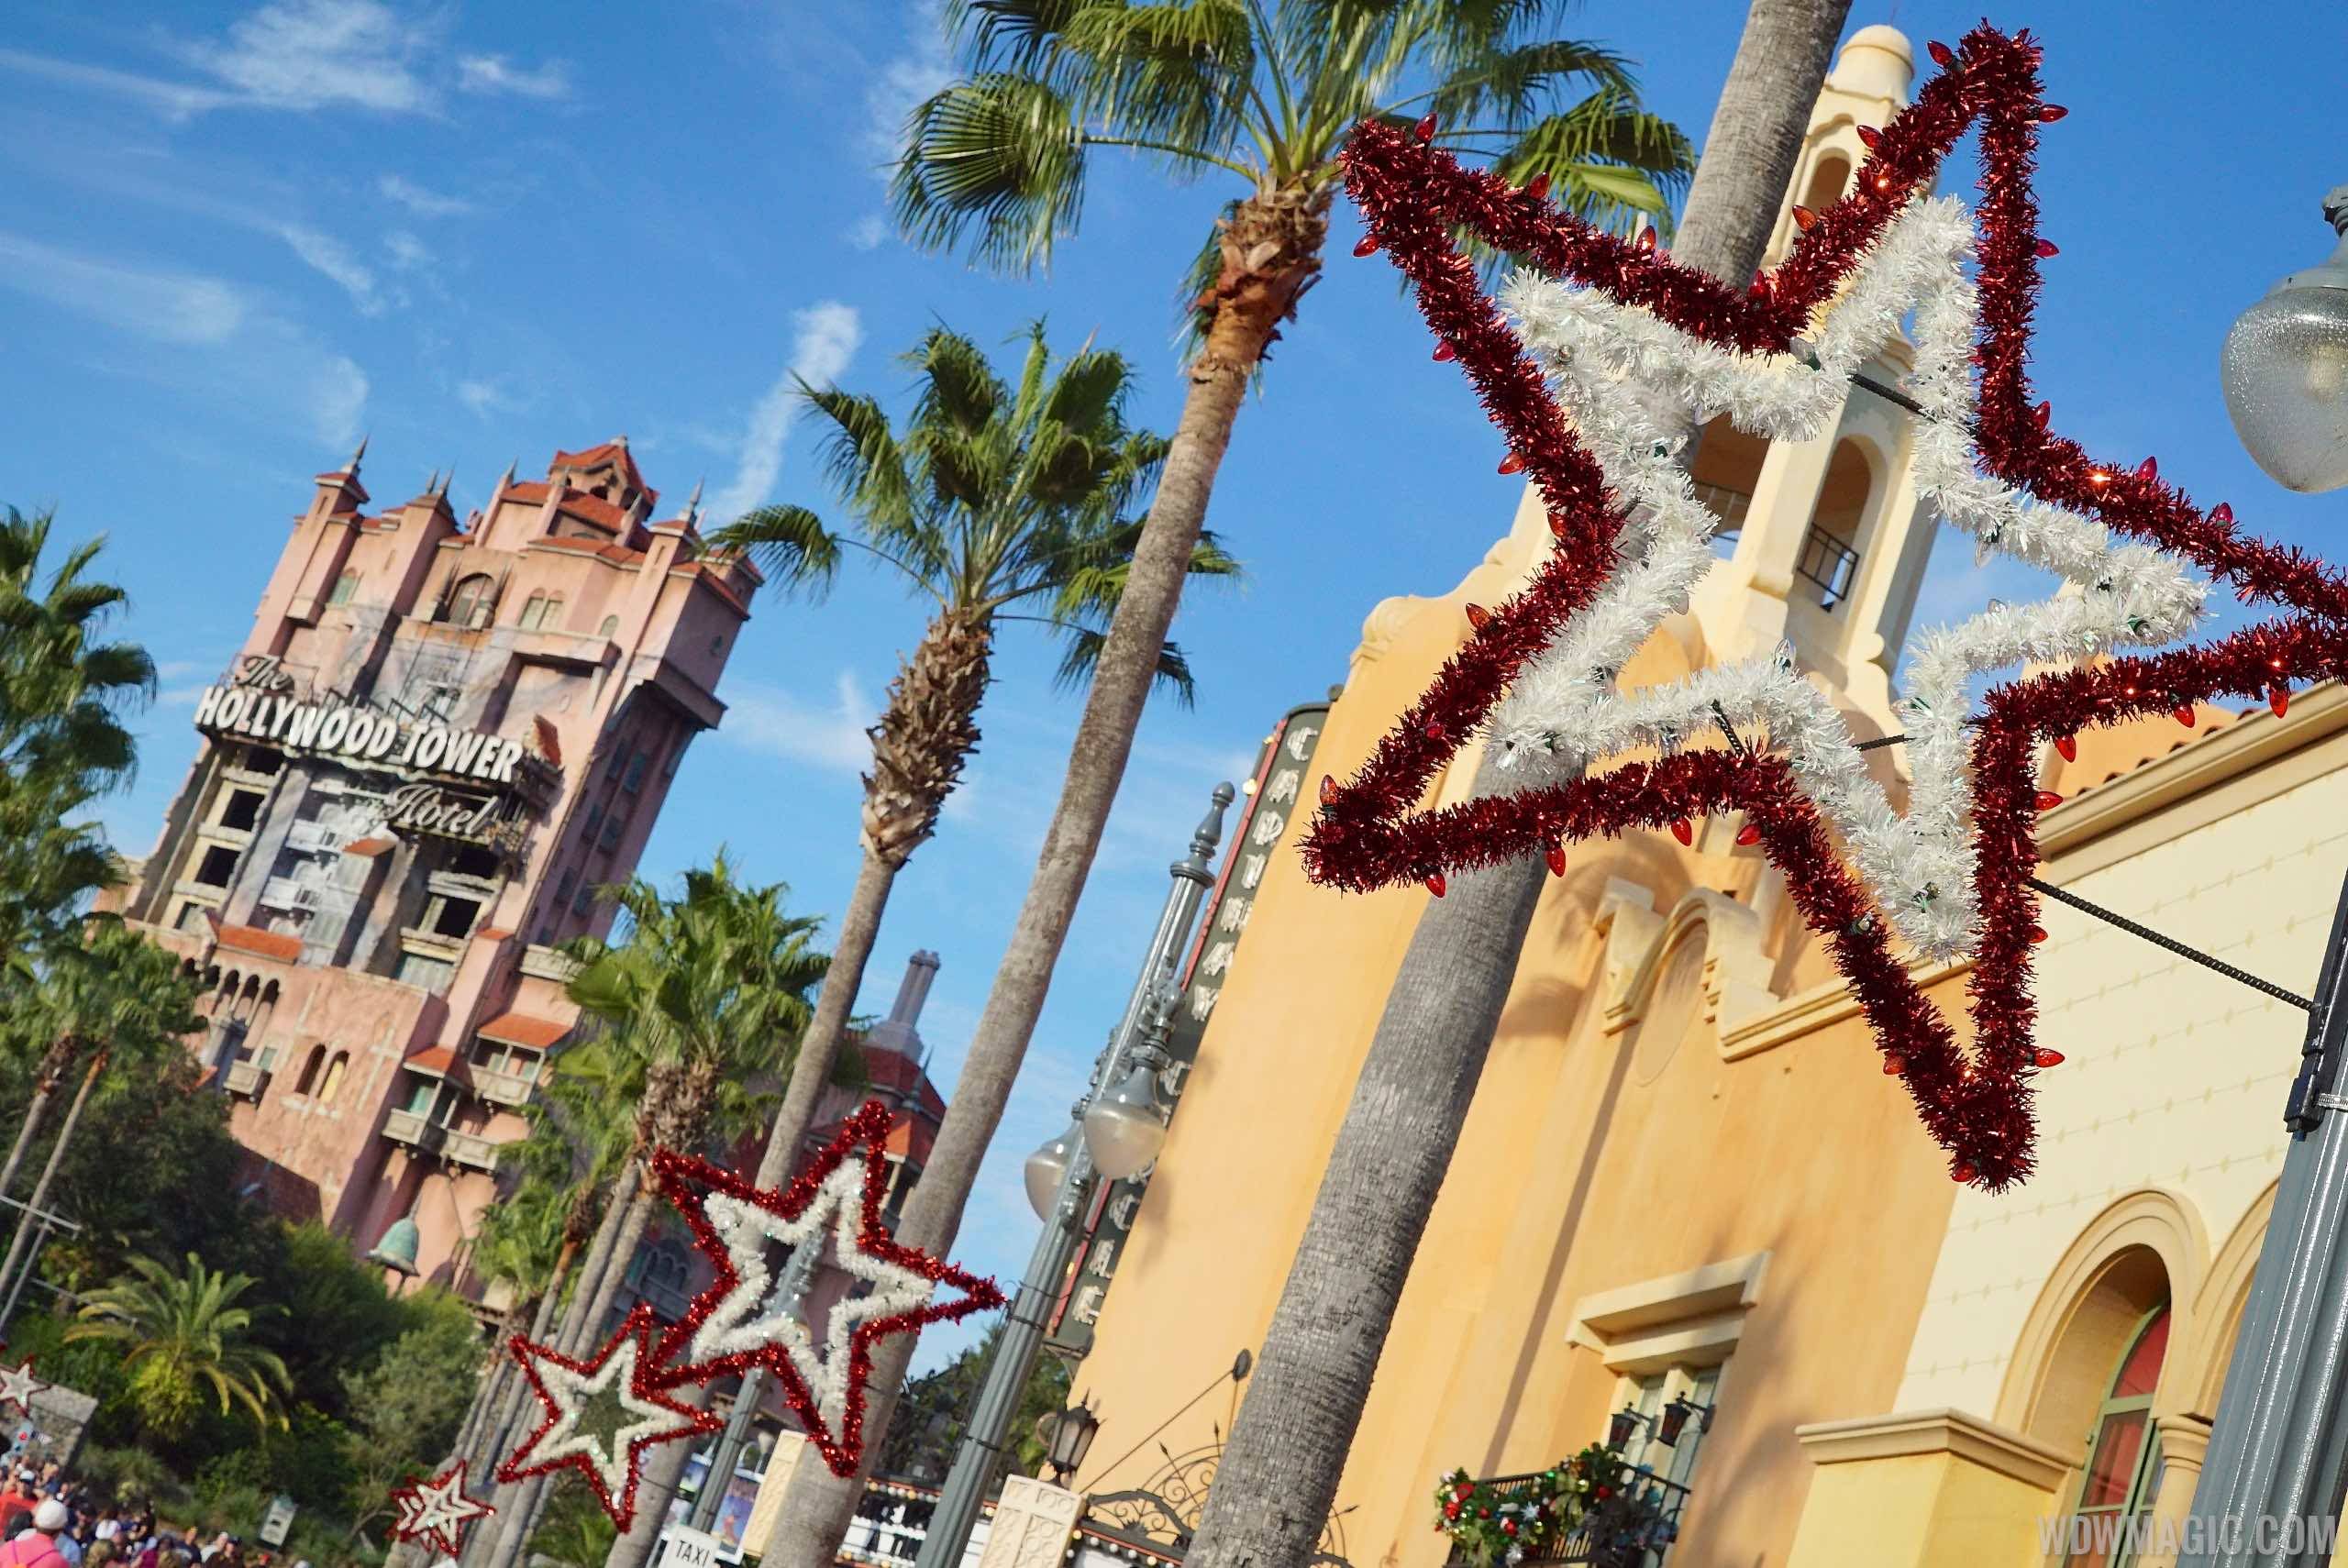 Santa Claus meet and greet coming to Disney's Hollywood Studios for the holidays